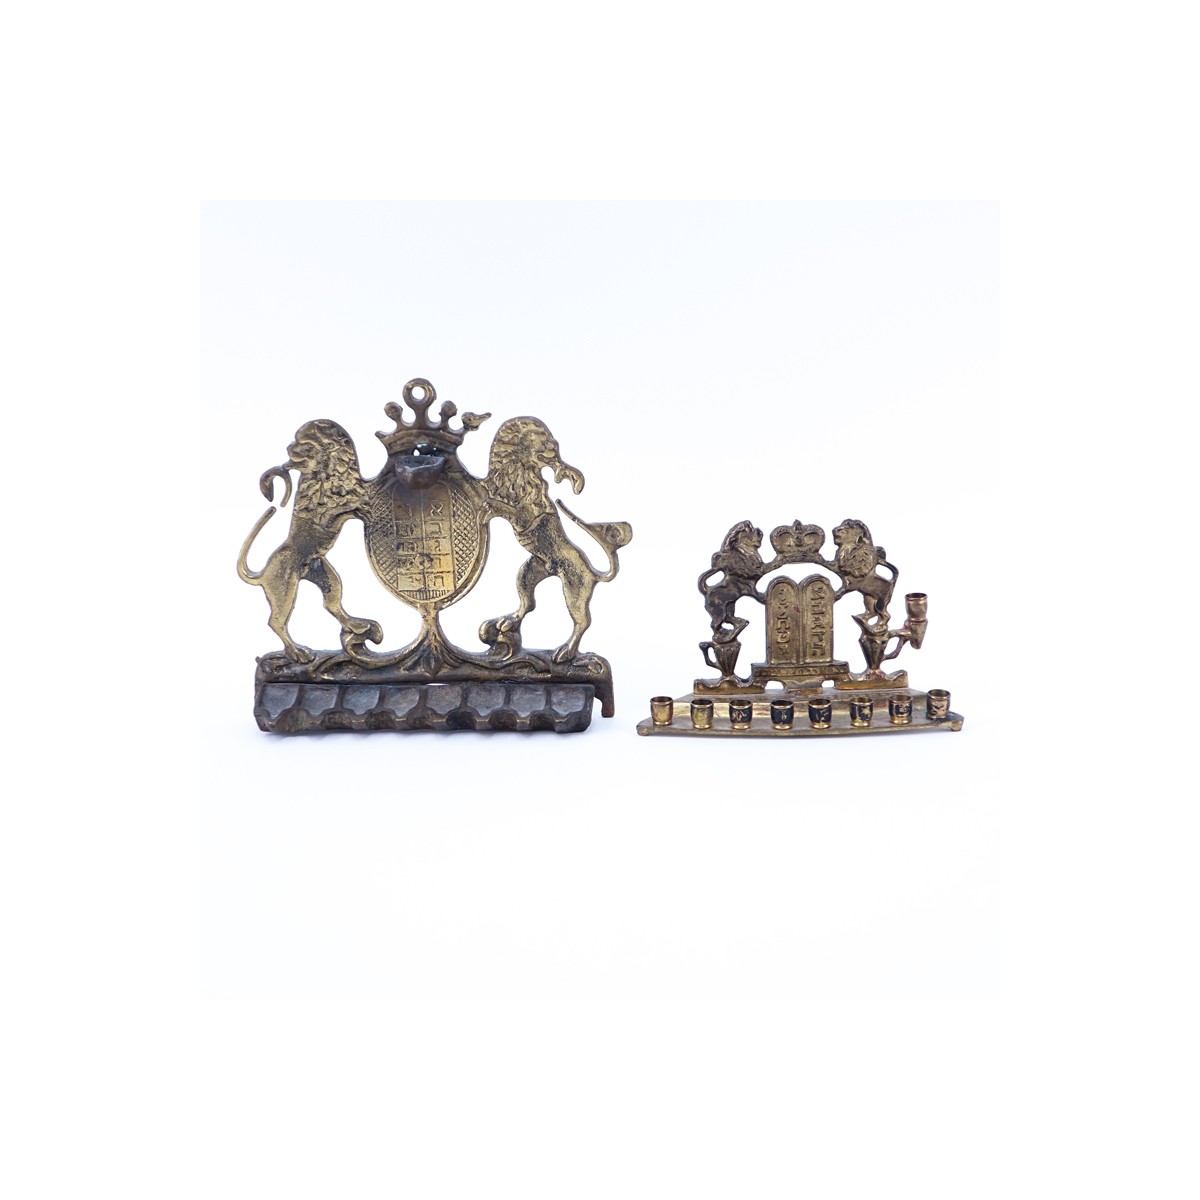 Grouping of Two (2) Vintage Gilt Brass Menorahs. Rubbing and wear